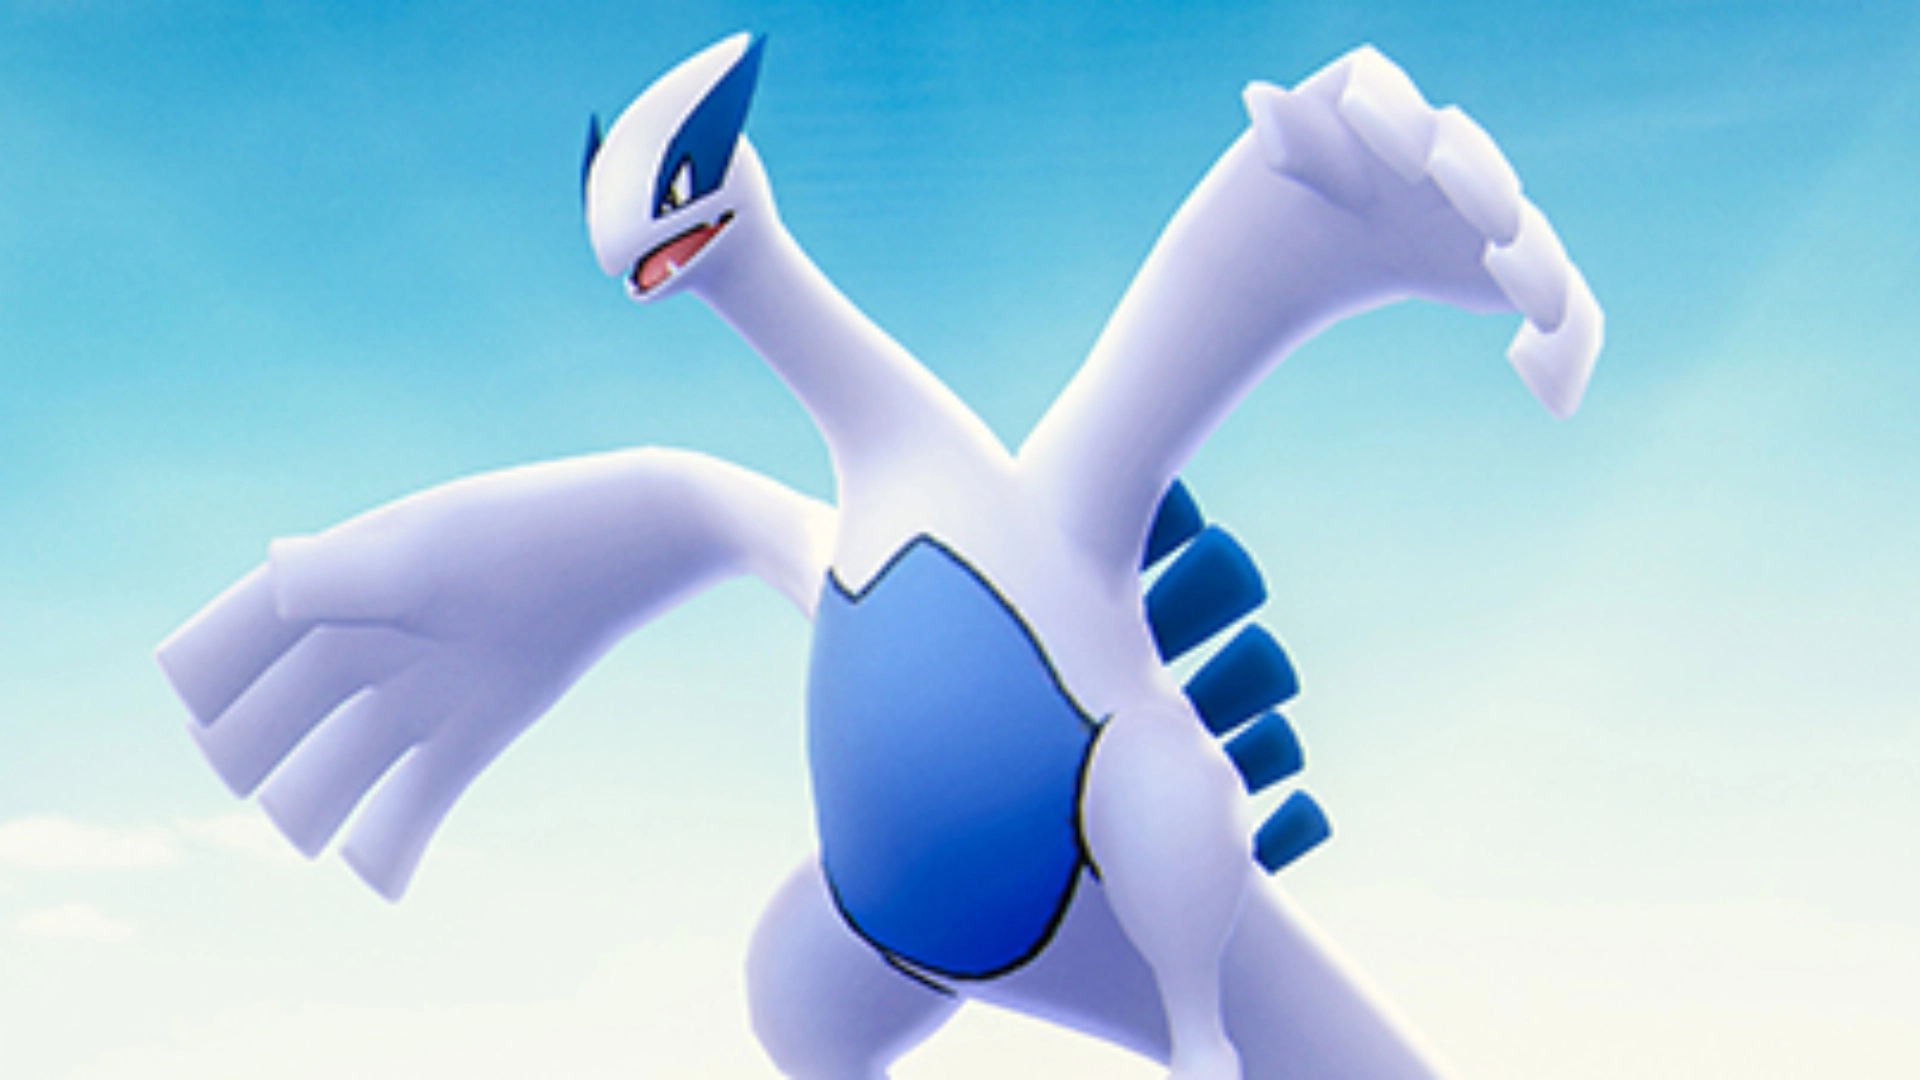 Apex shadow Lugia and Ho-oh are swooping into Pokémon Go